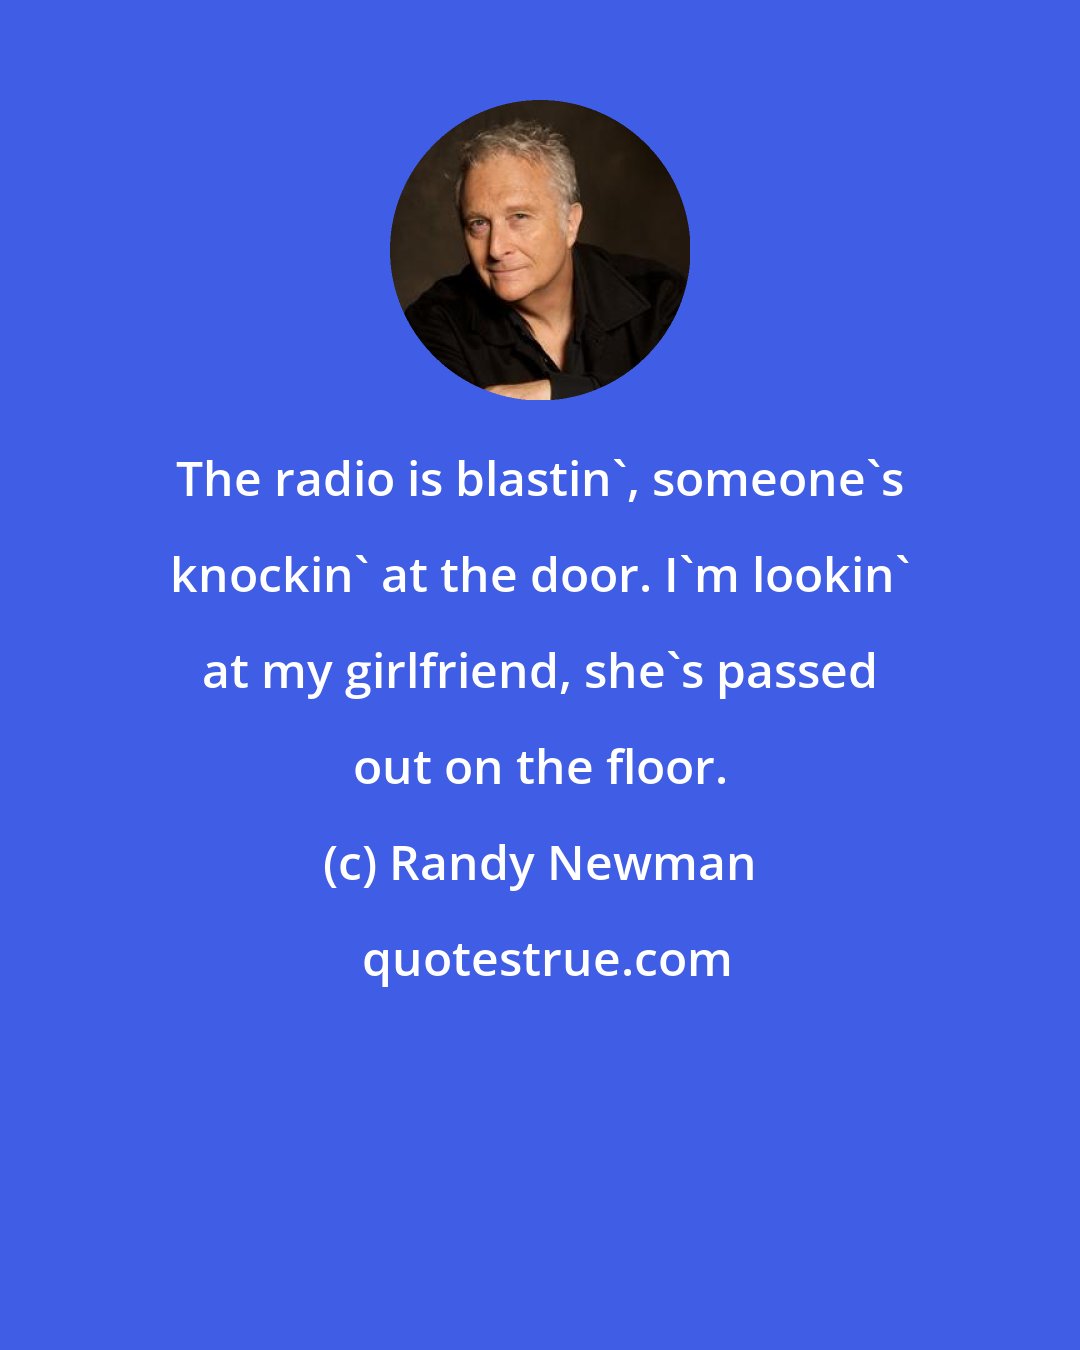 Randy Newman: The radio is blastin', someone's knockin' at the door. I'm lookin' at my girlfriend, she's passed out on the floor.